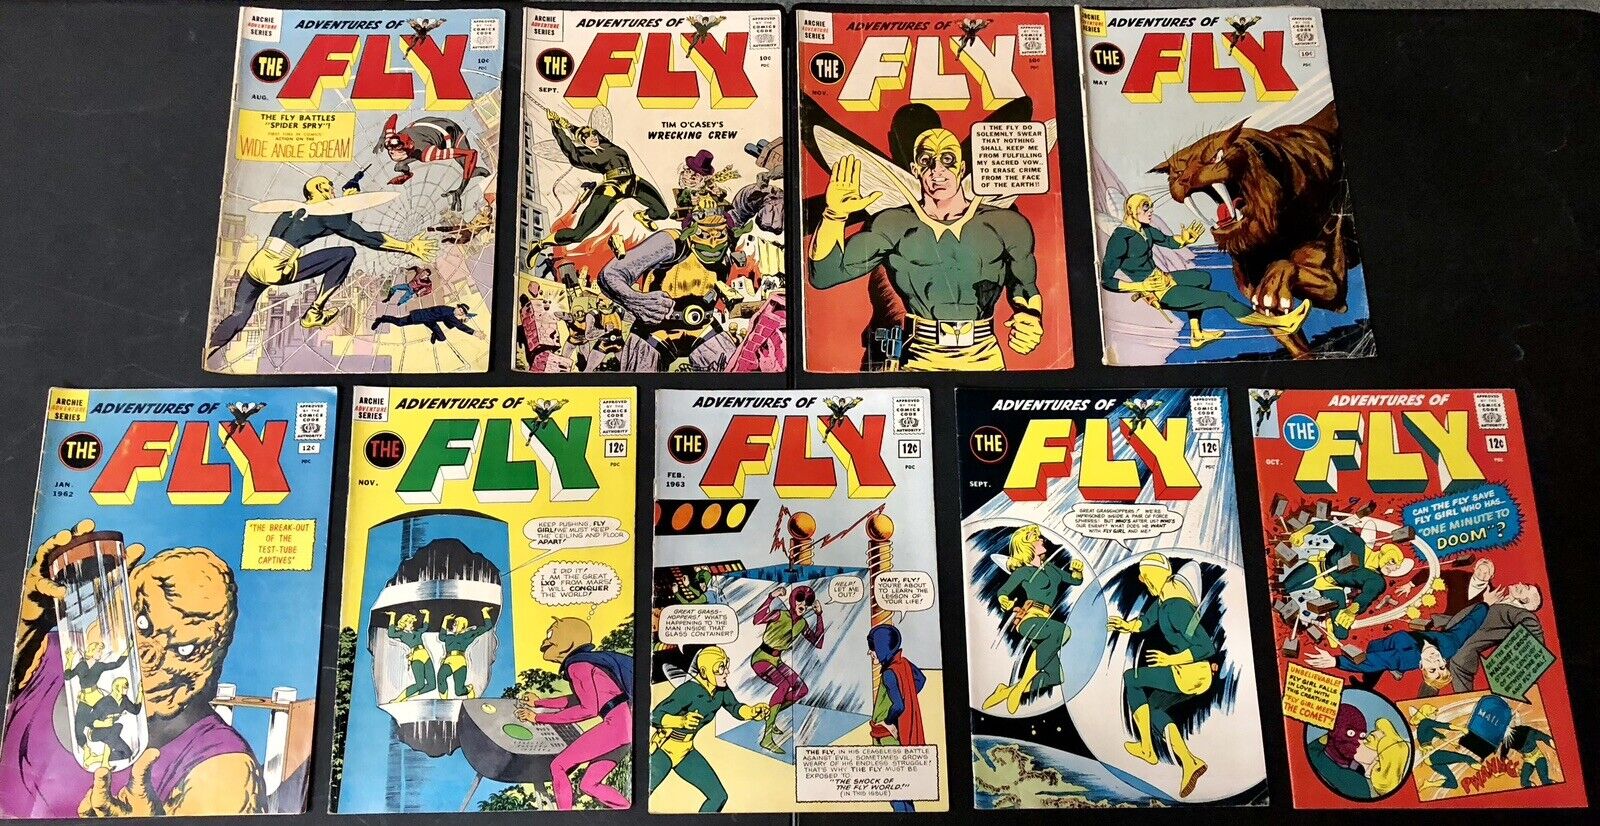 Archie- Adventures of the Fly (1959-64) 9x Lot. #1, 2, 3, 12, 17, 23, 24, 27, 30